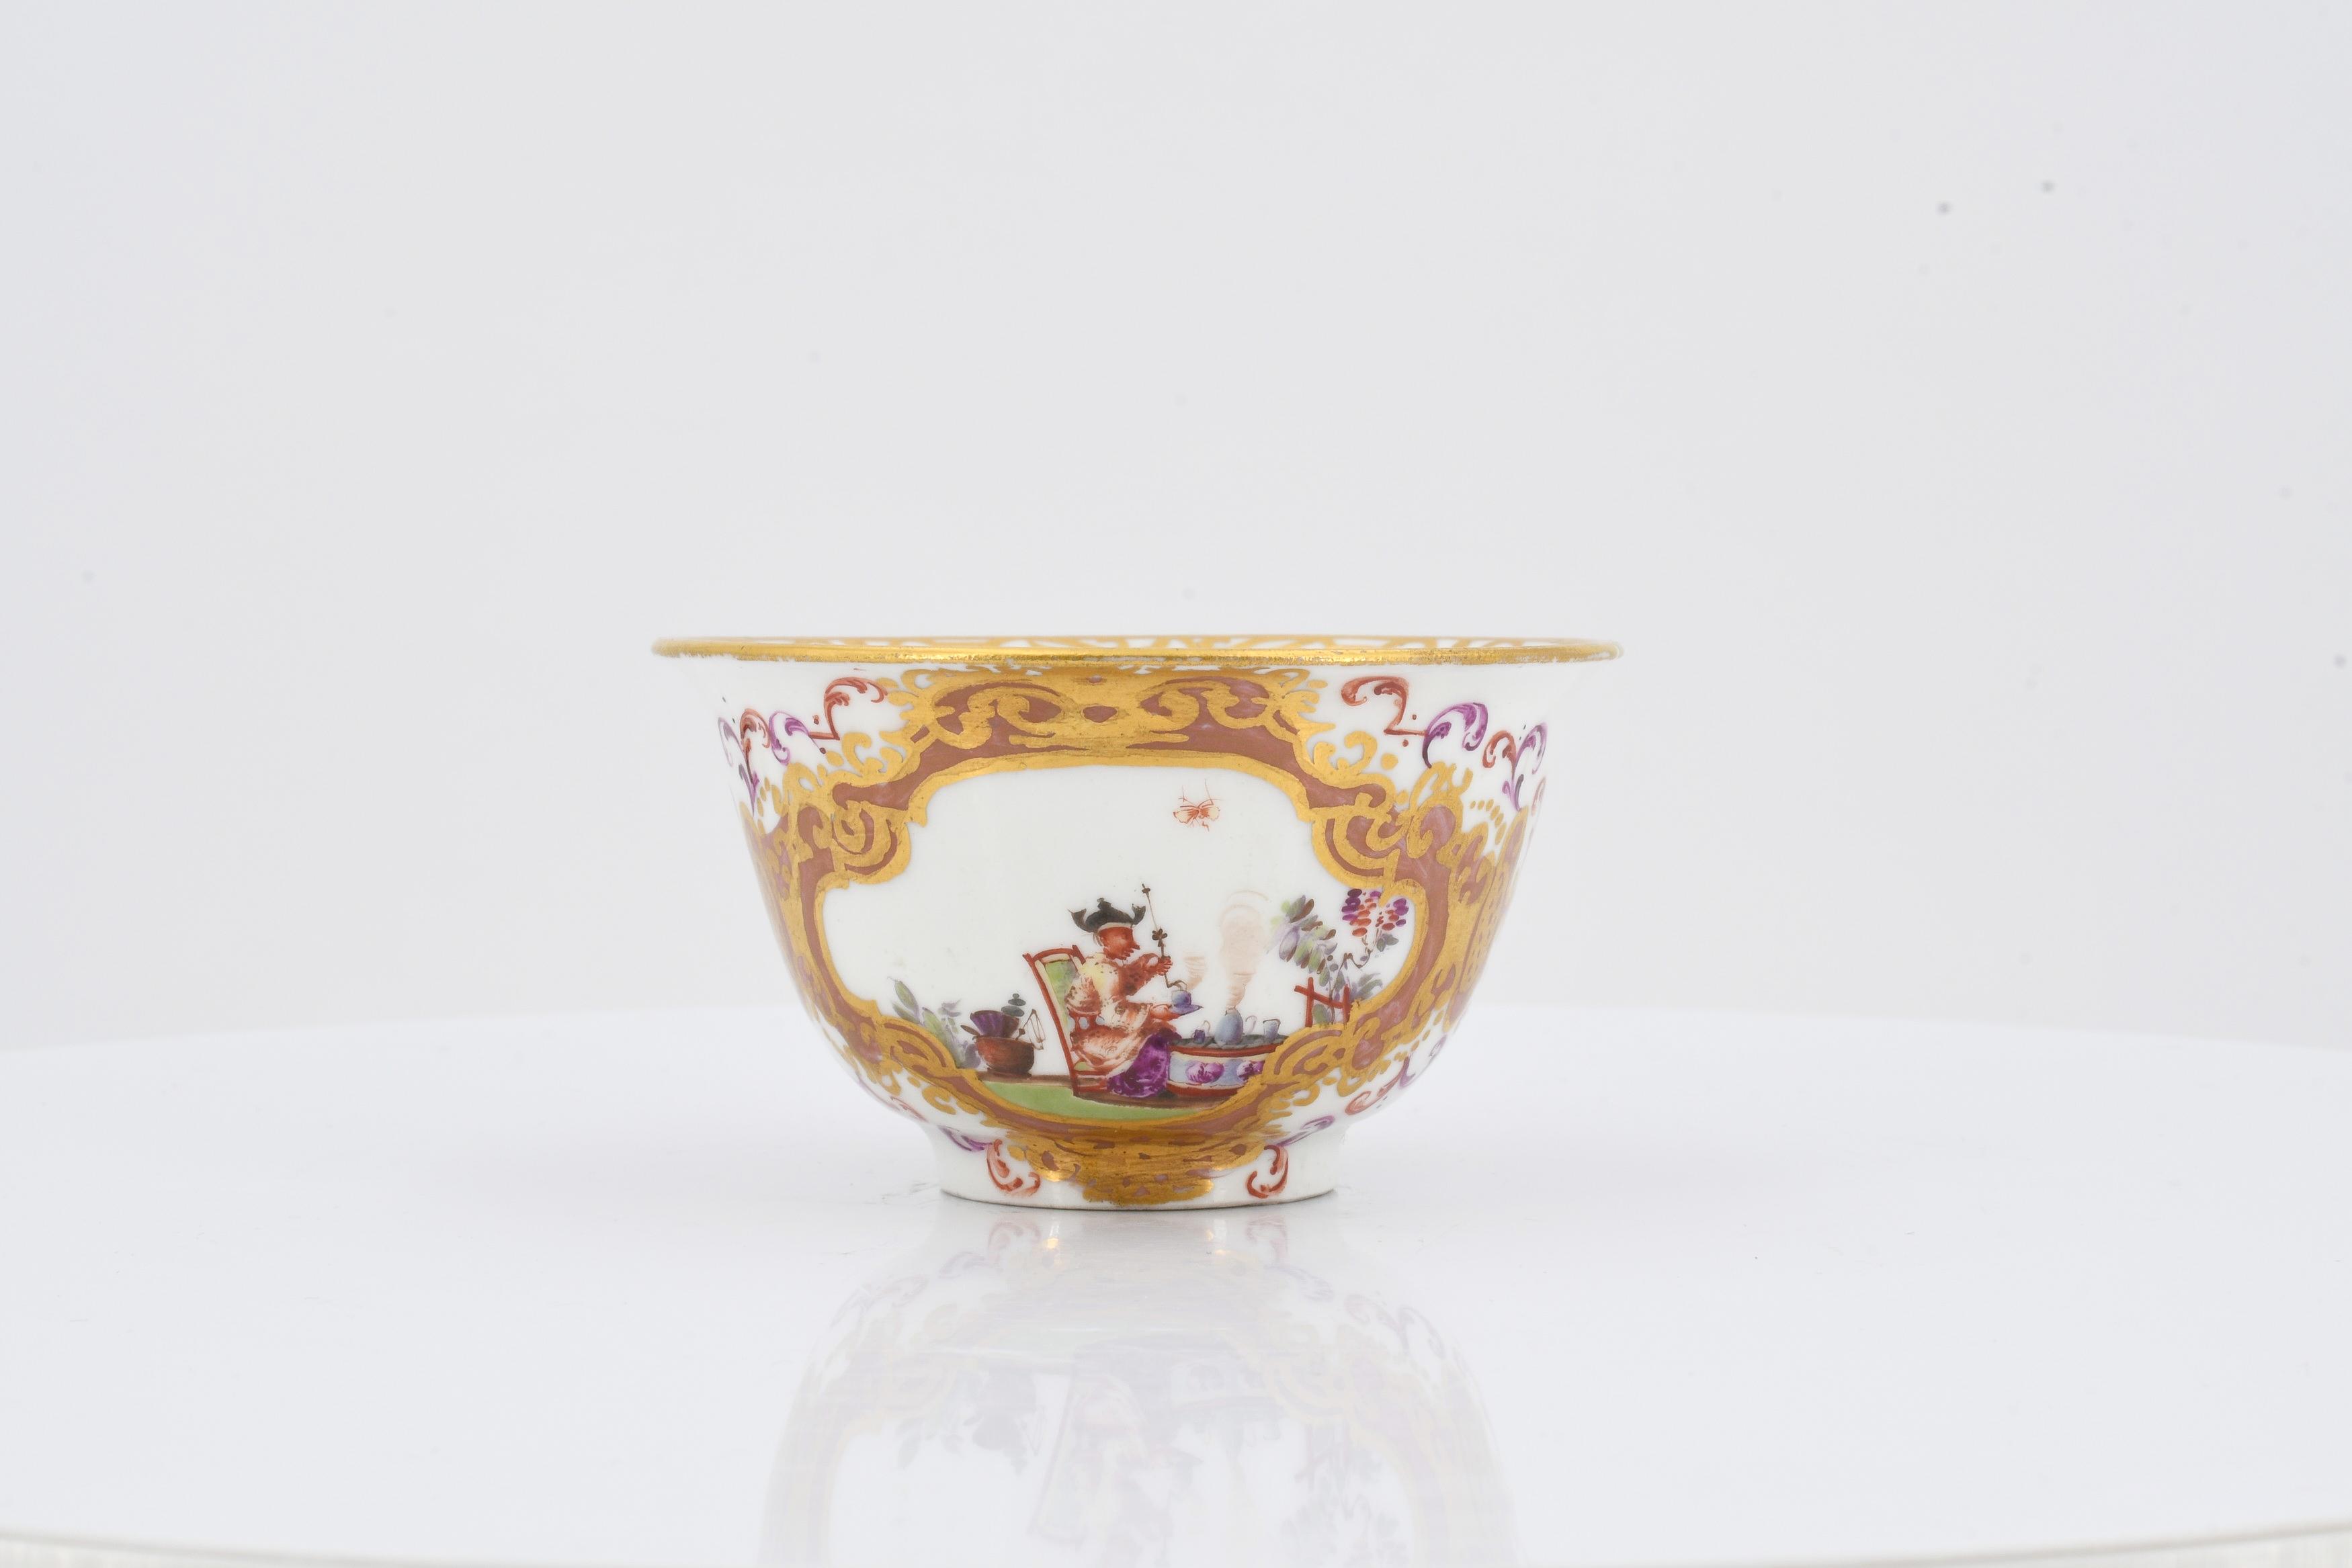 Tea bowl and saucer with chinoiseries - Image 9 of 10